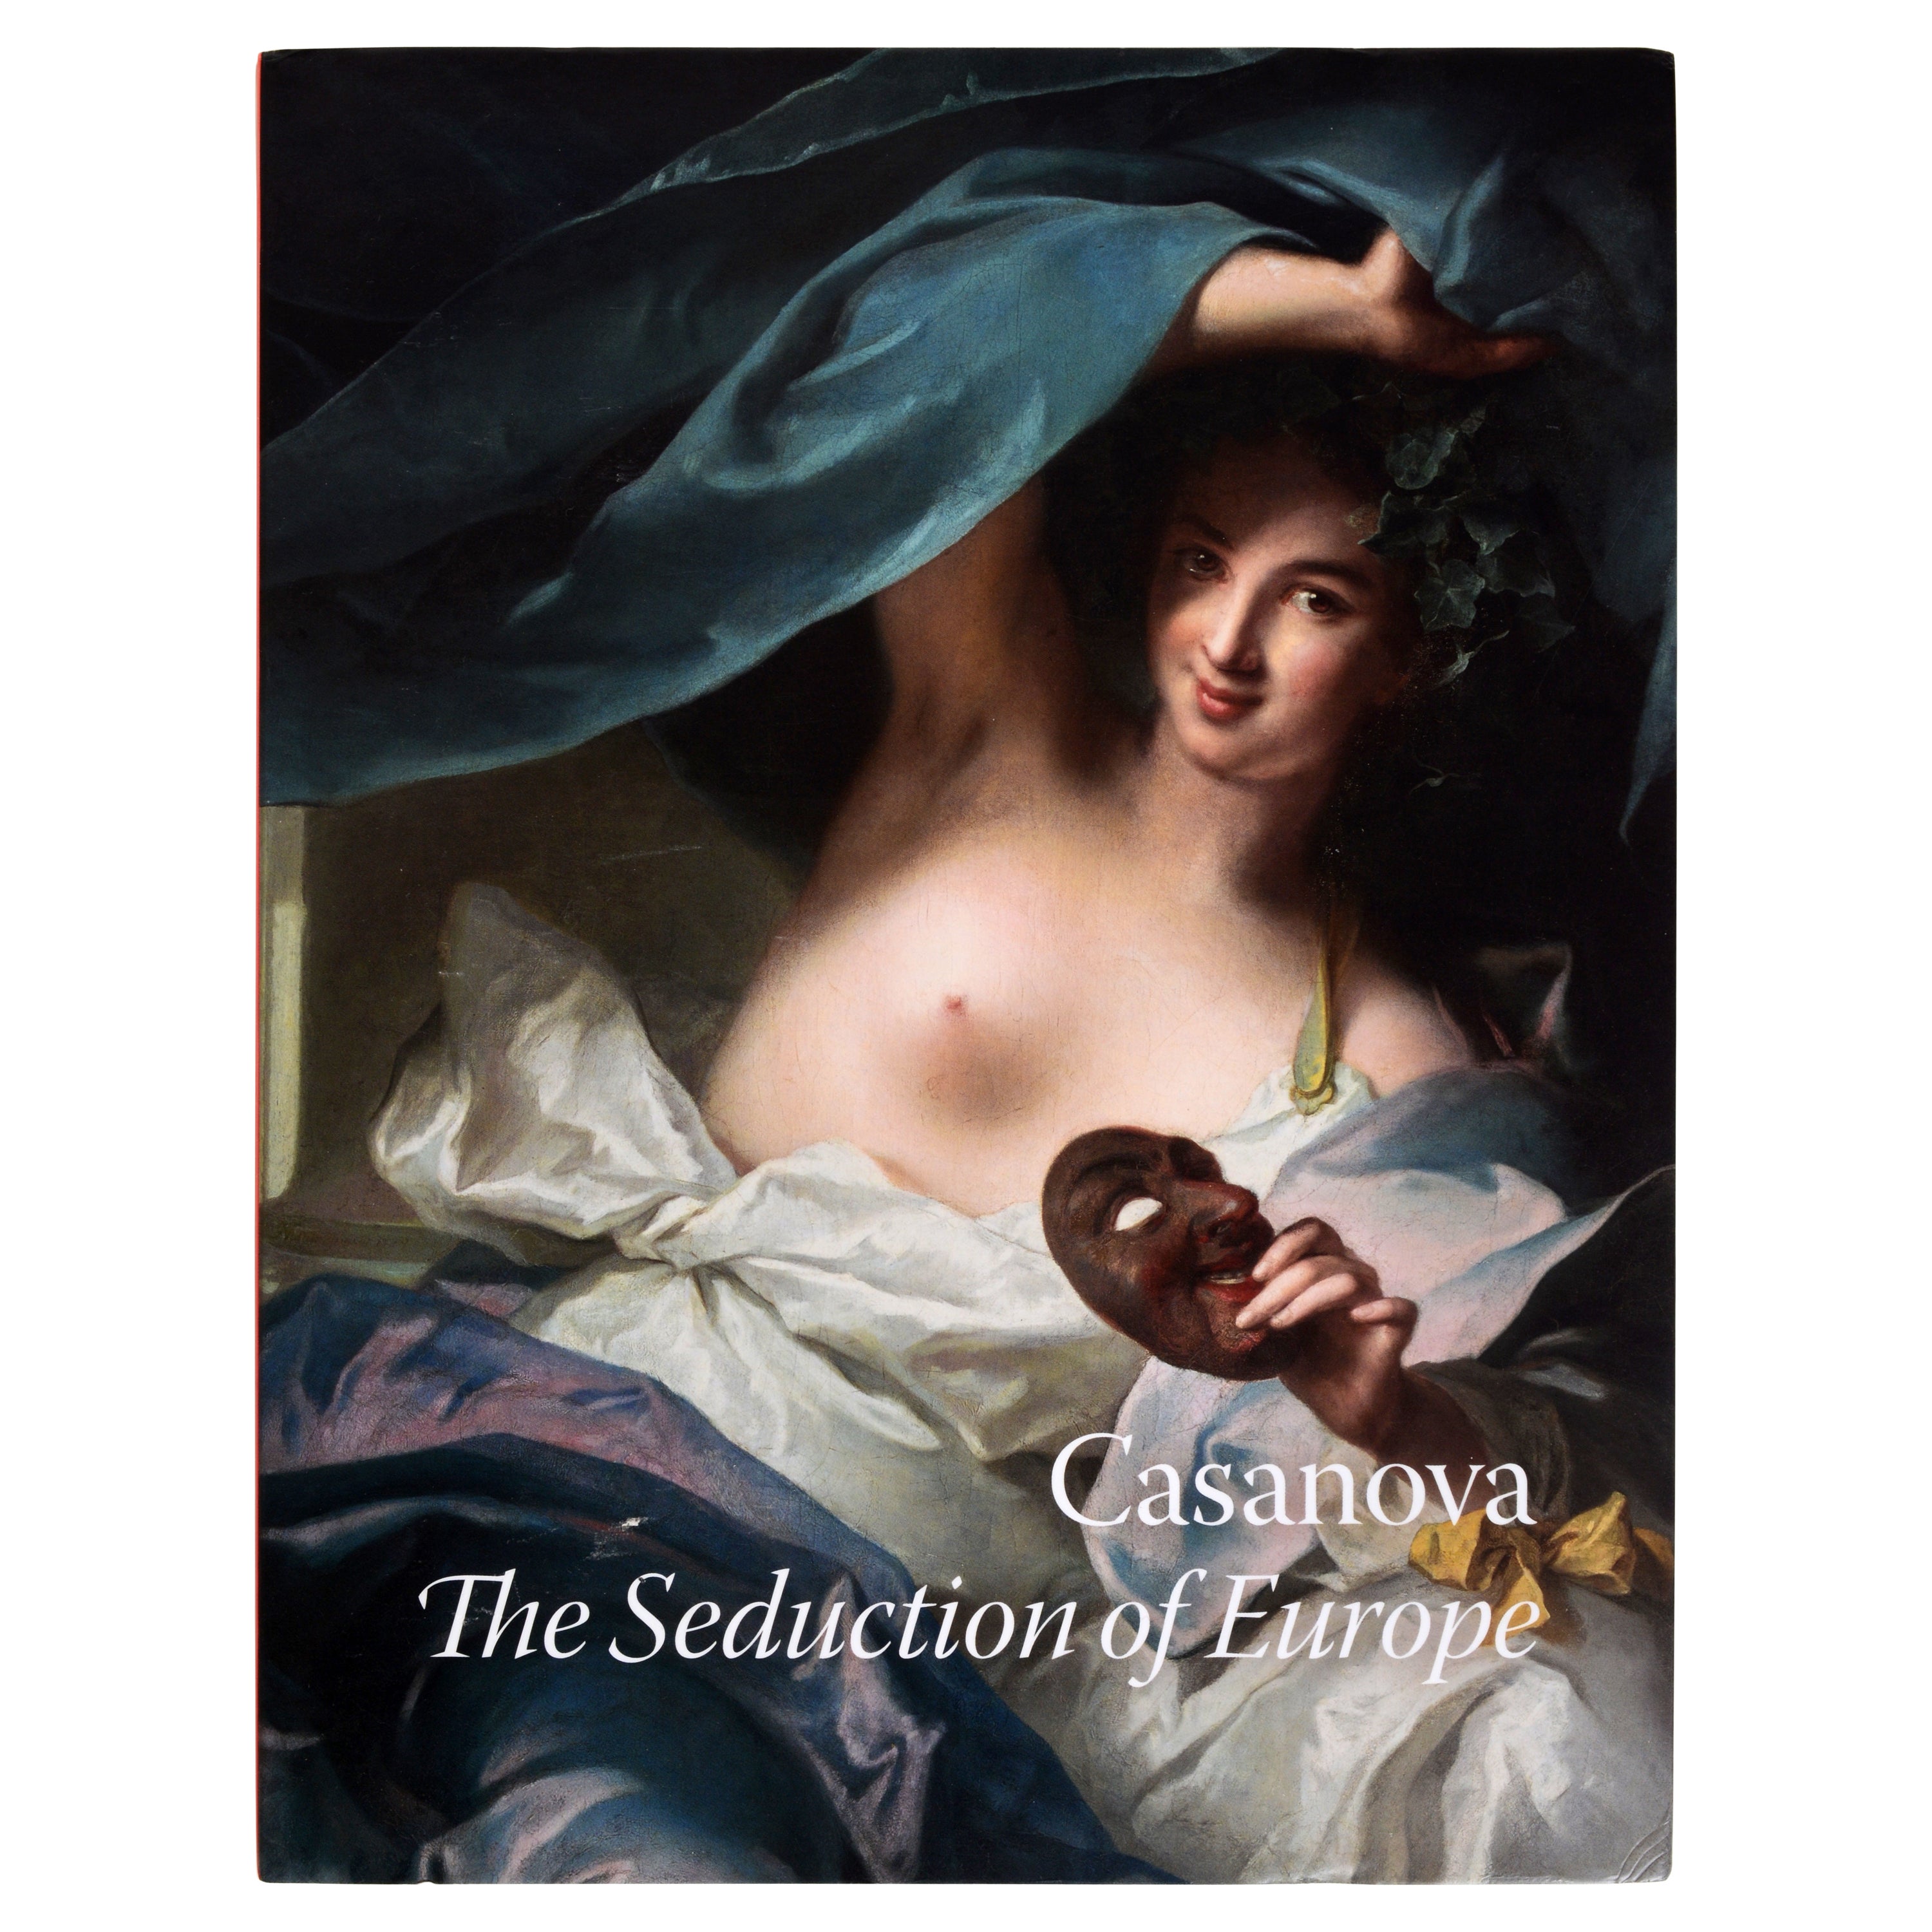 Exhibition, Casanovia; Seduction of Europe, by Frederick Ilchman, Stated 1st Ed 